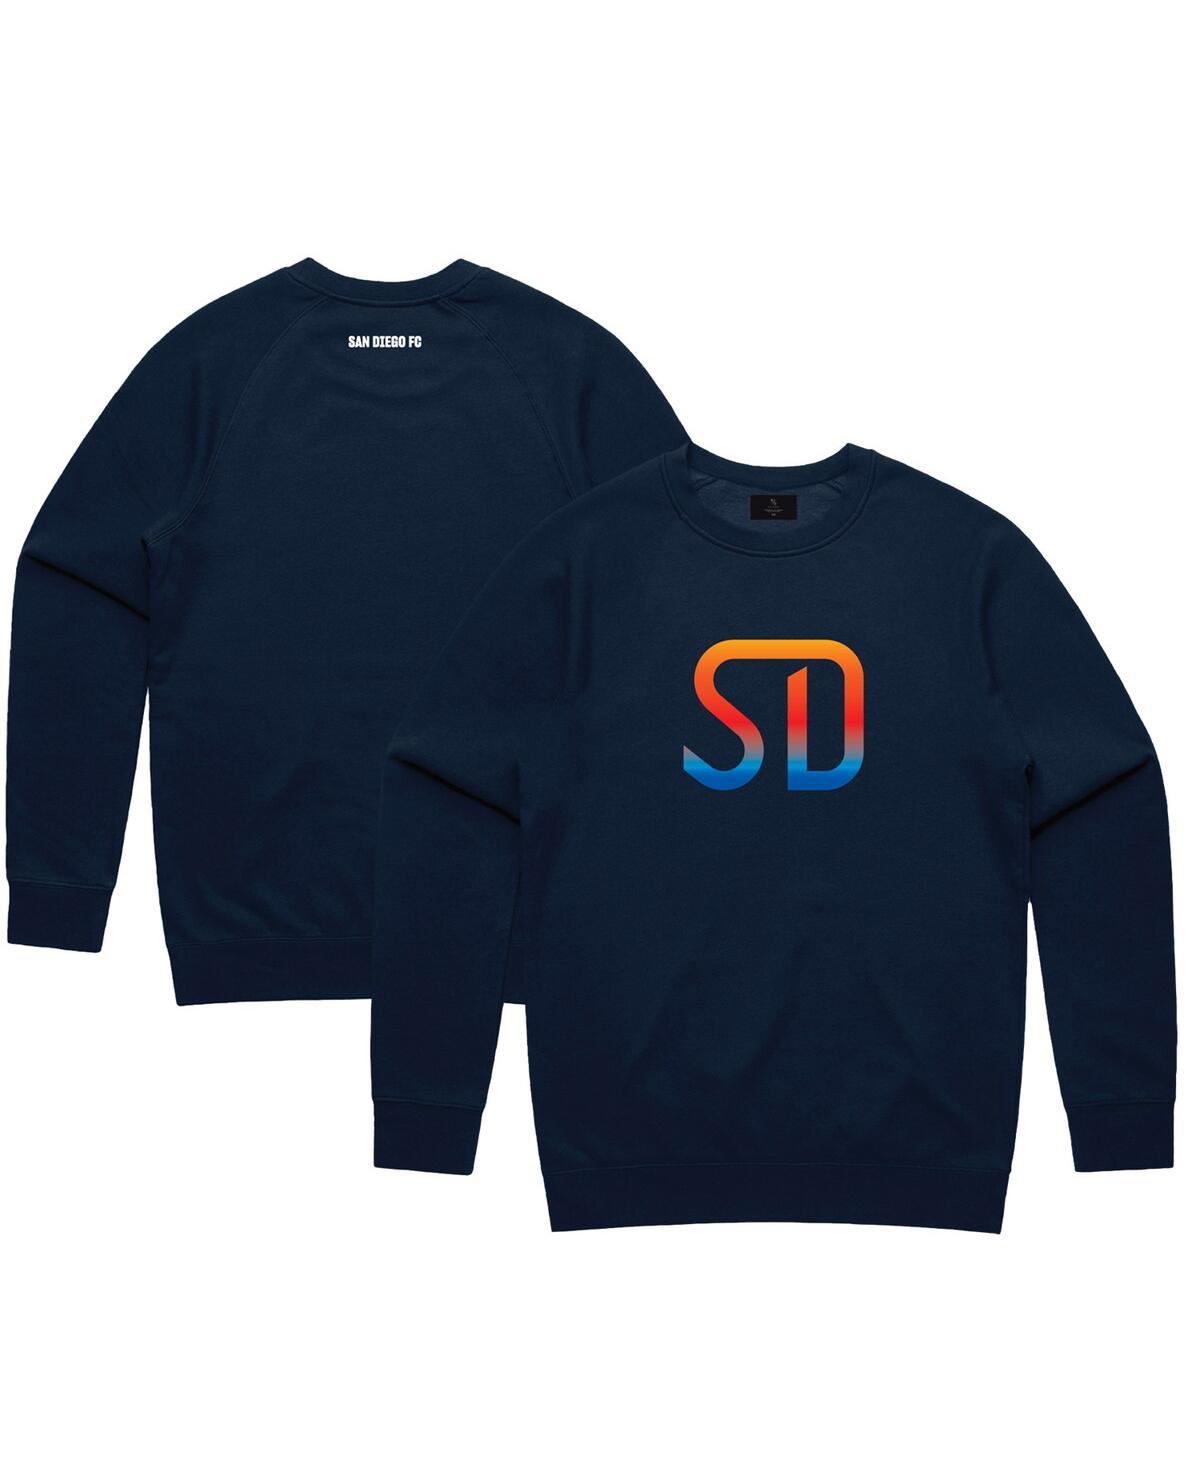 Men's and Women's Peace Collective Navy San Diego Fc Pullover Sweatshirt - Navy